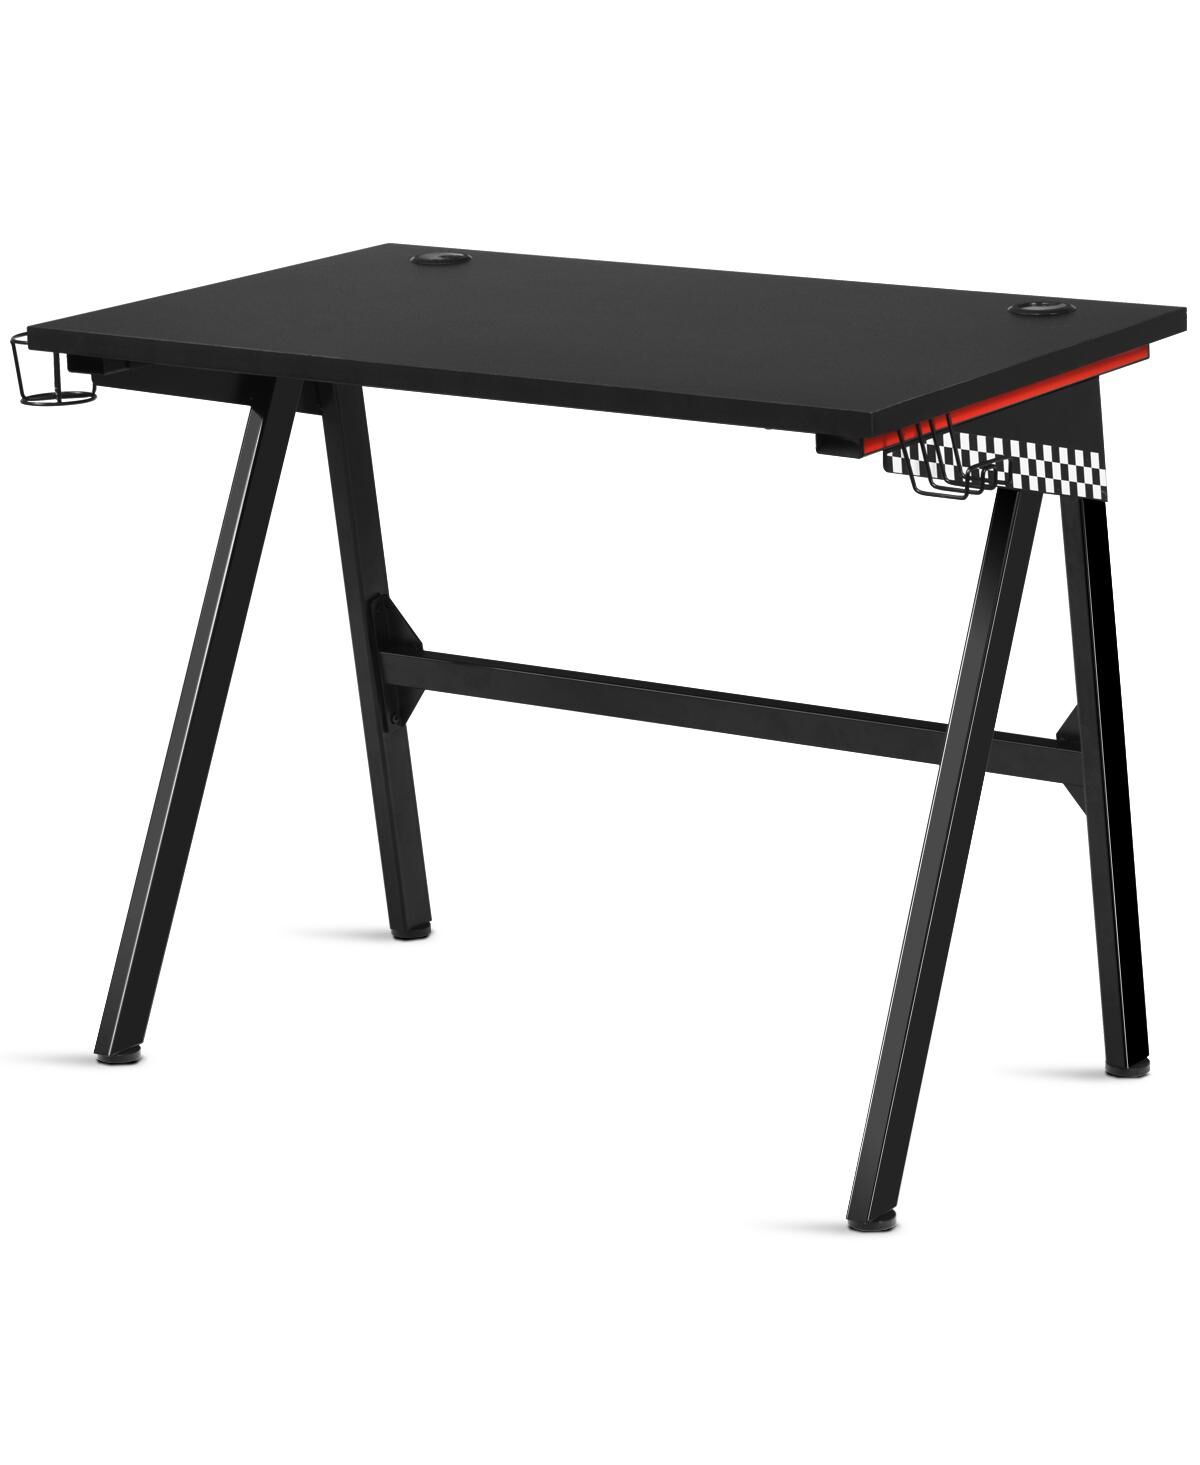 Costway Gaming Desk Home Office Pc Table Computer Desk - Black